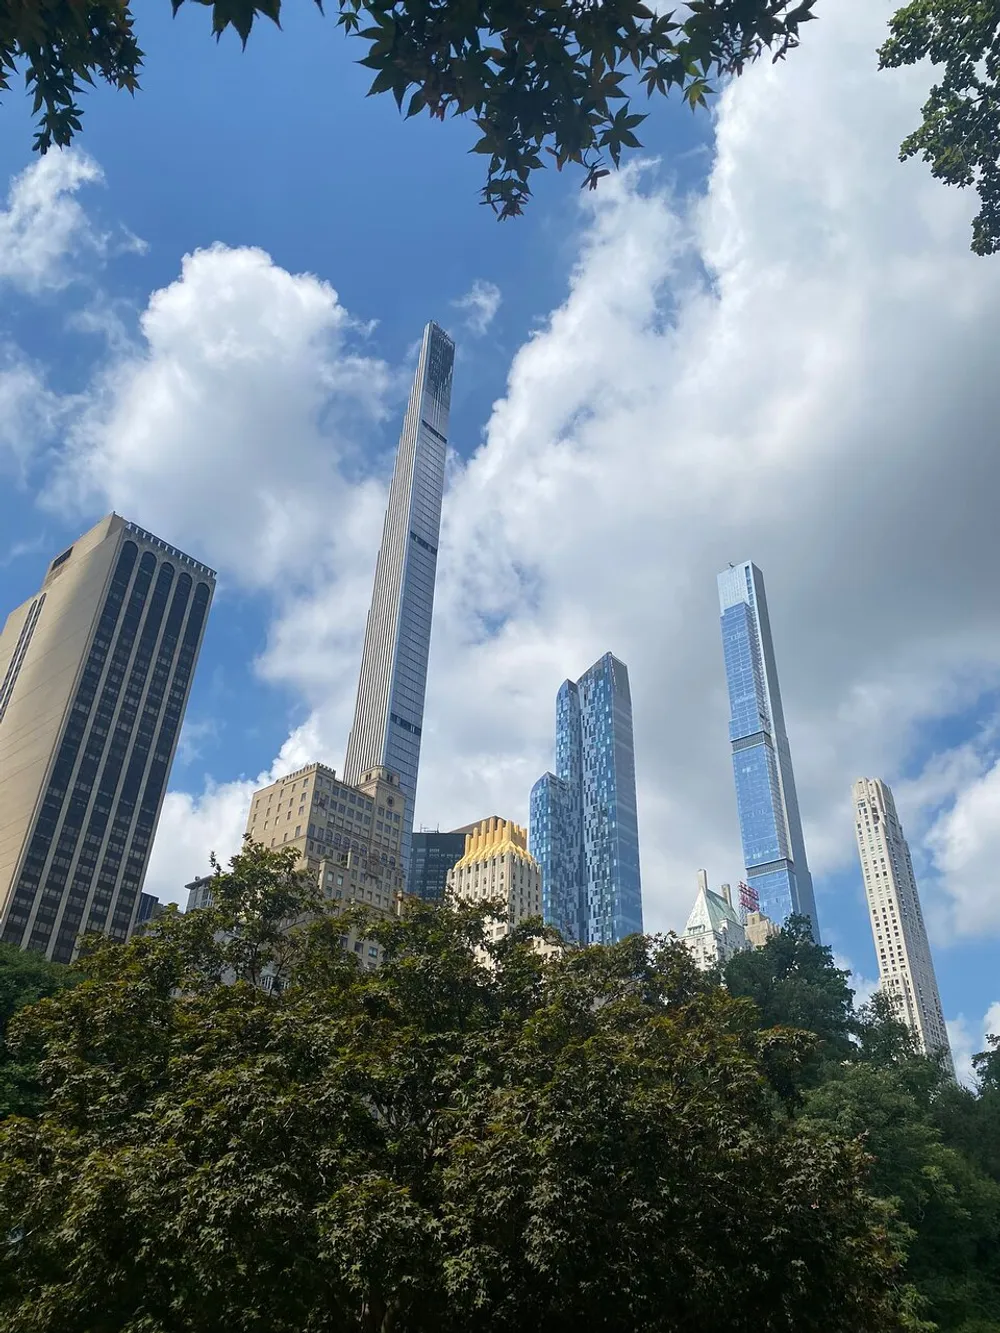 The image captures a view of tall skyscrapers soaring into the sky juxtaposed with the natural greenery of treetops in the foreground under a cloudy blue sky